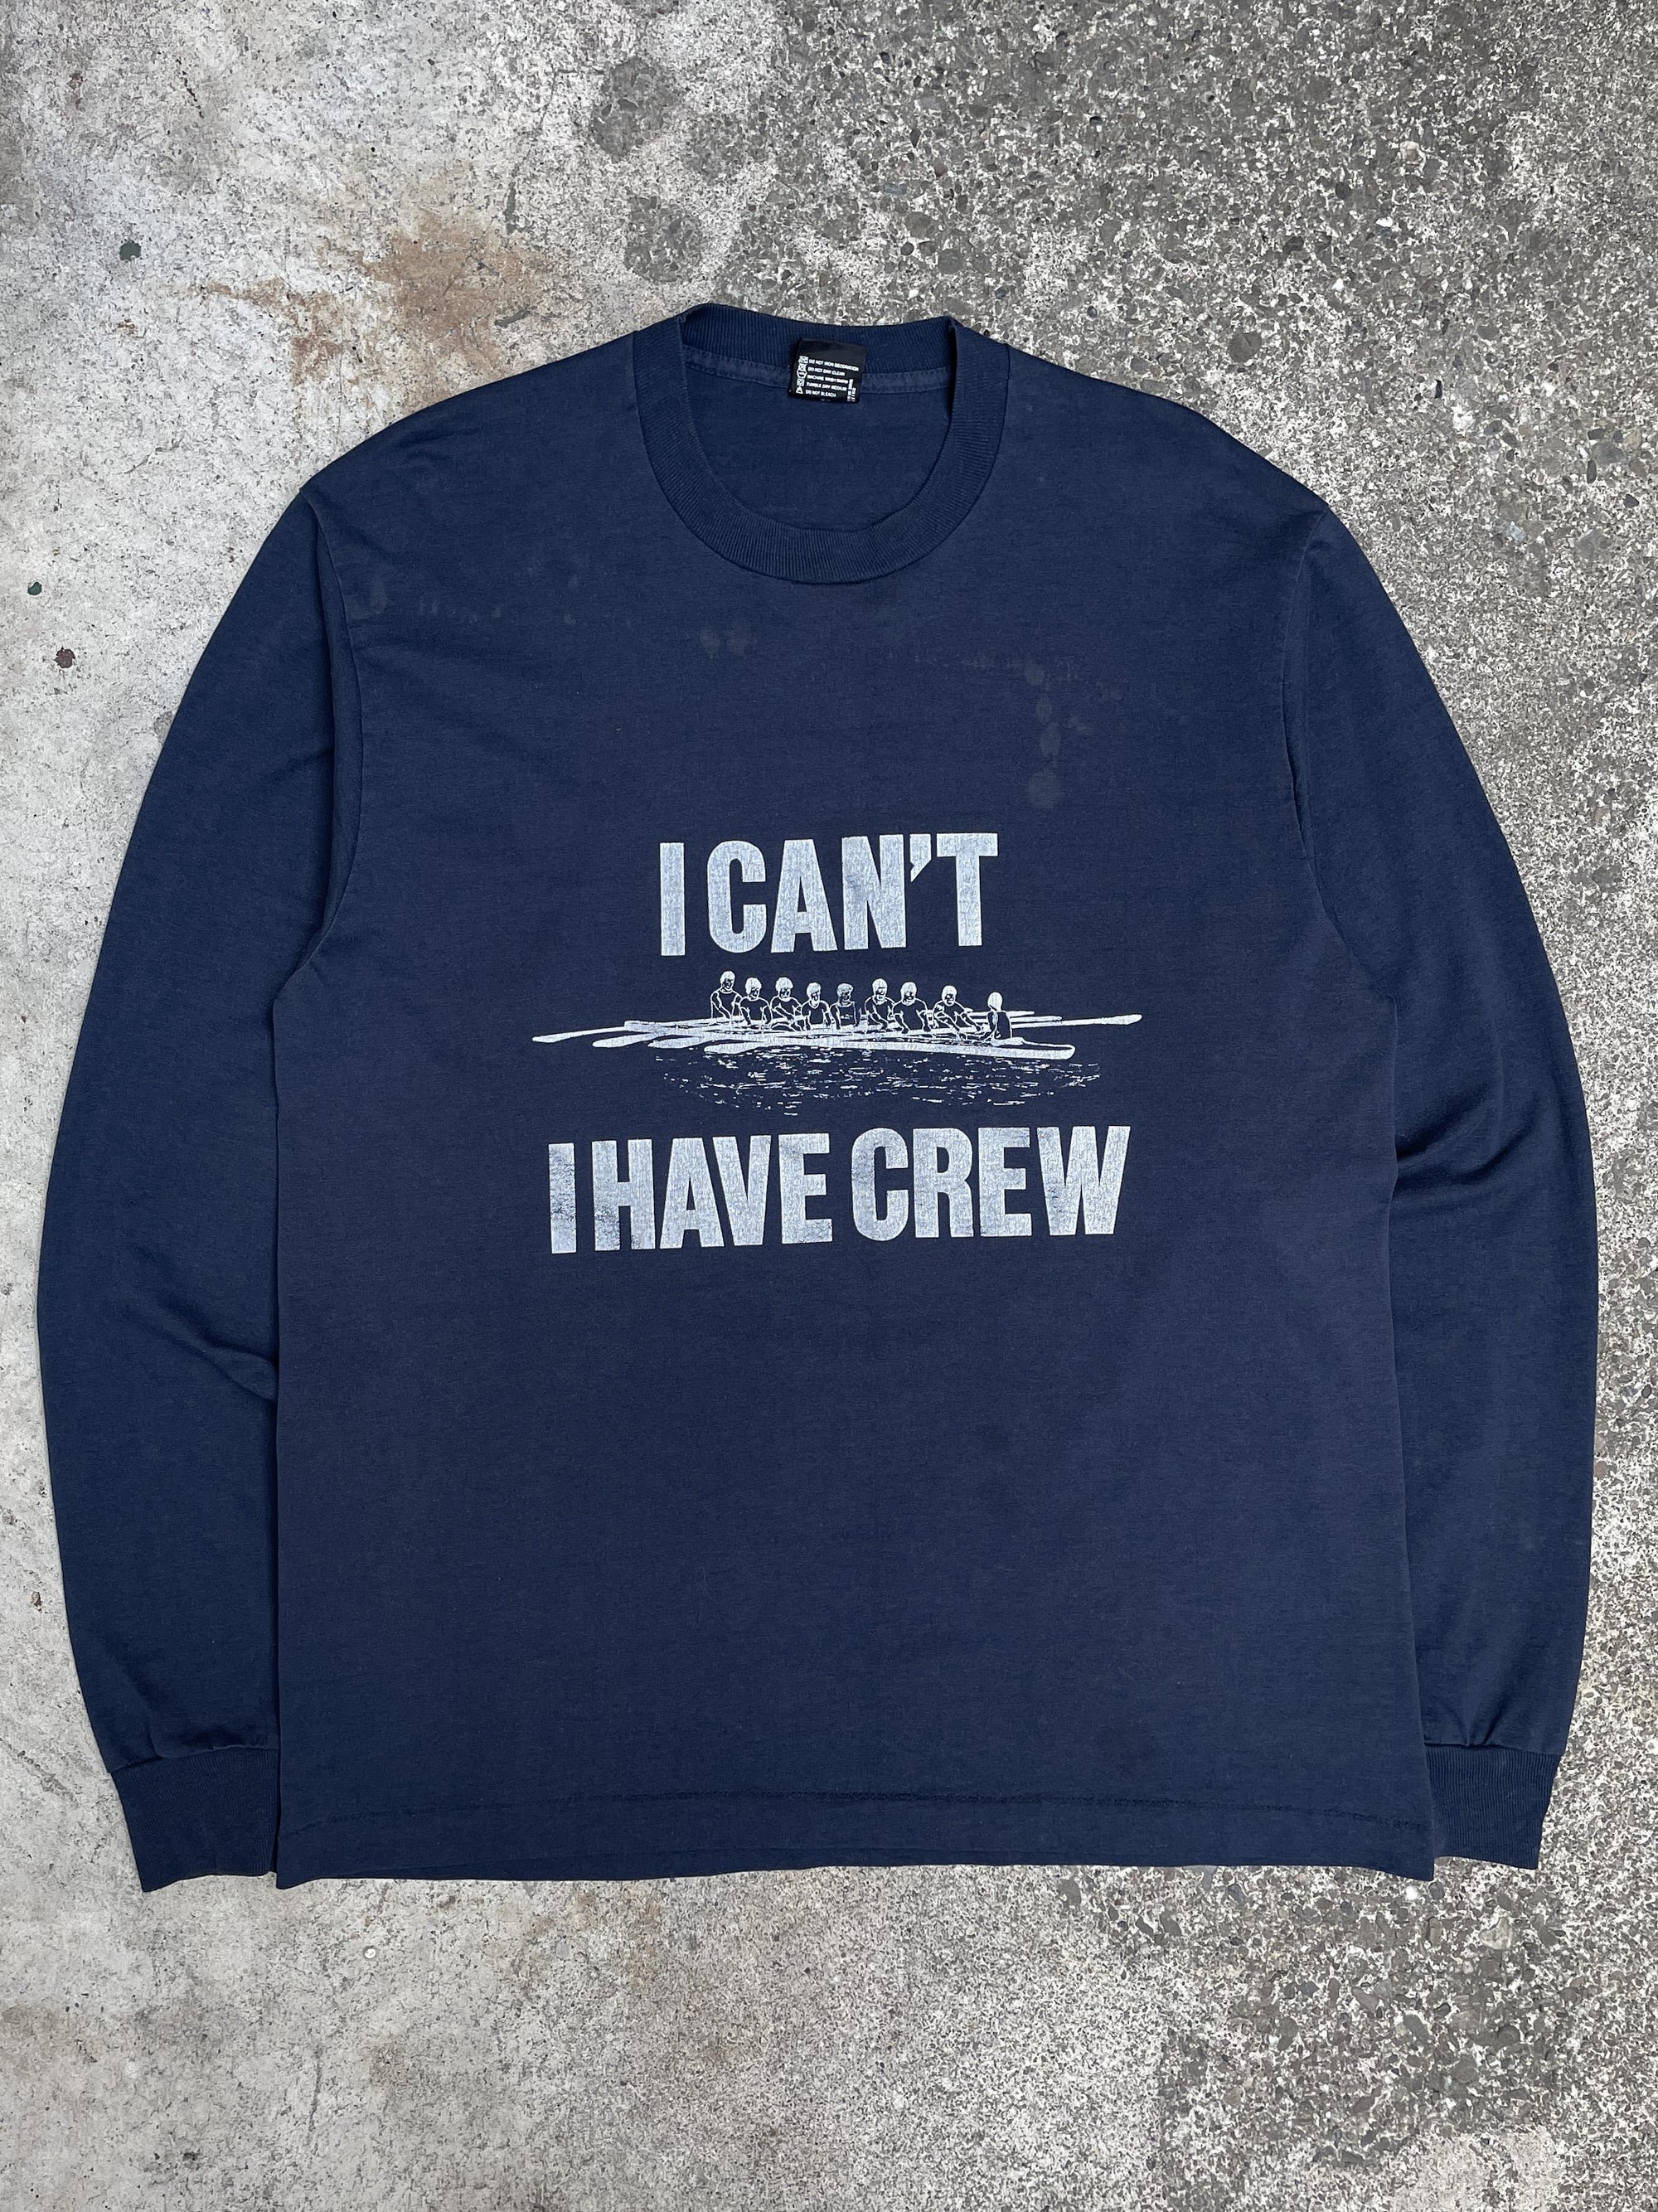 1990s “I Can’t I Have Crew” Long Sleeve Tee (L/XL)